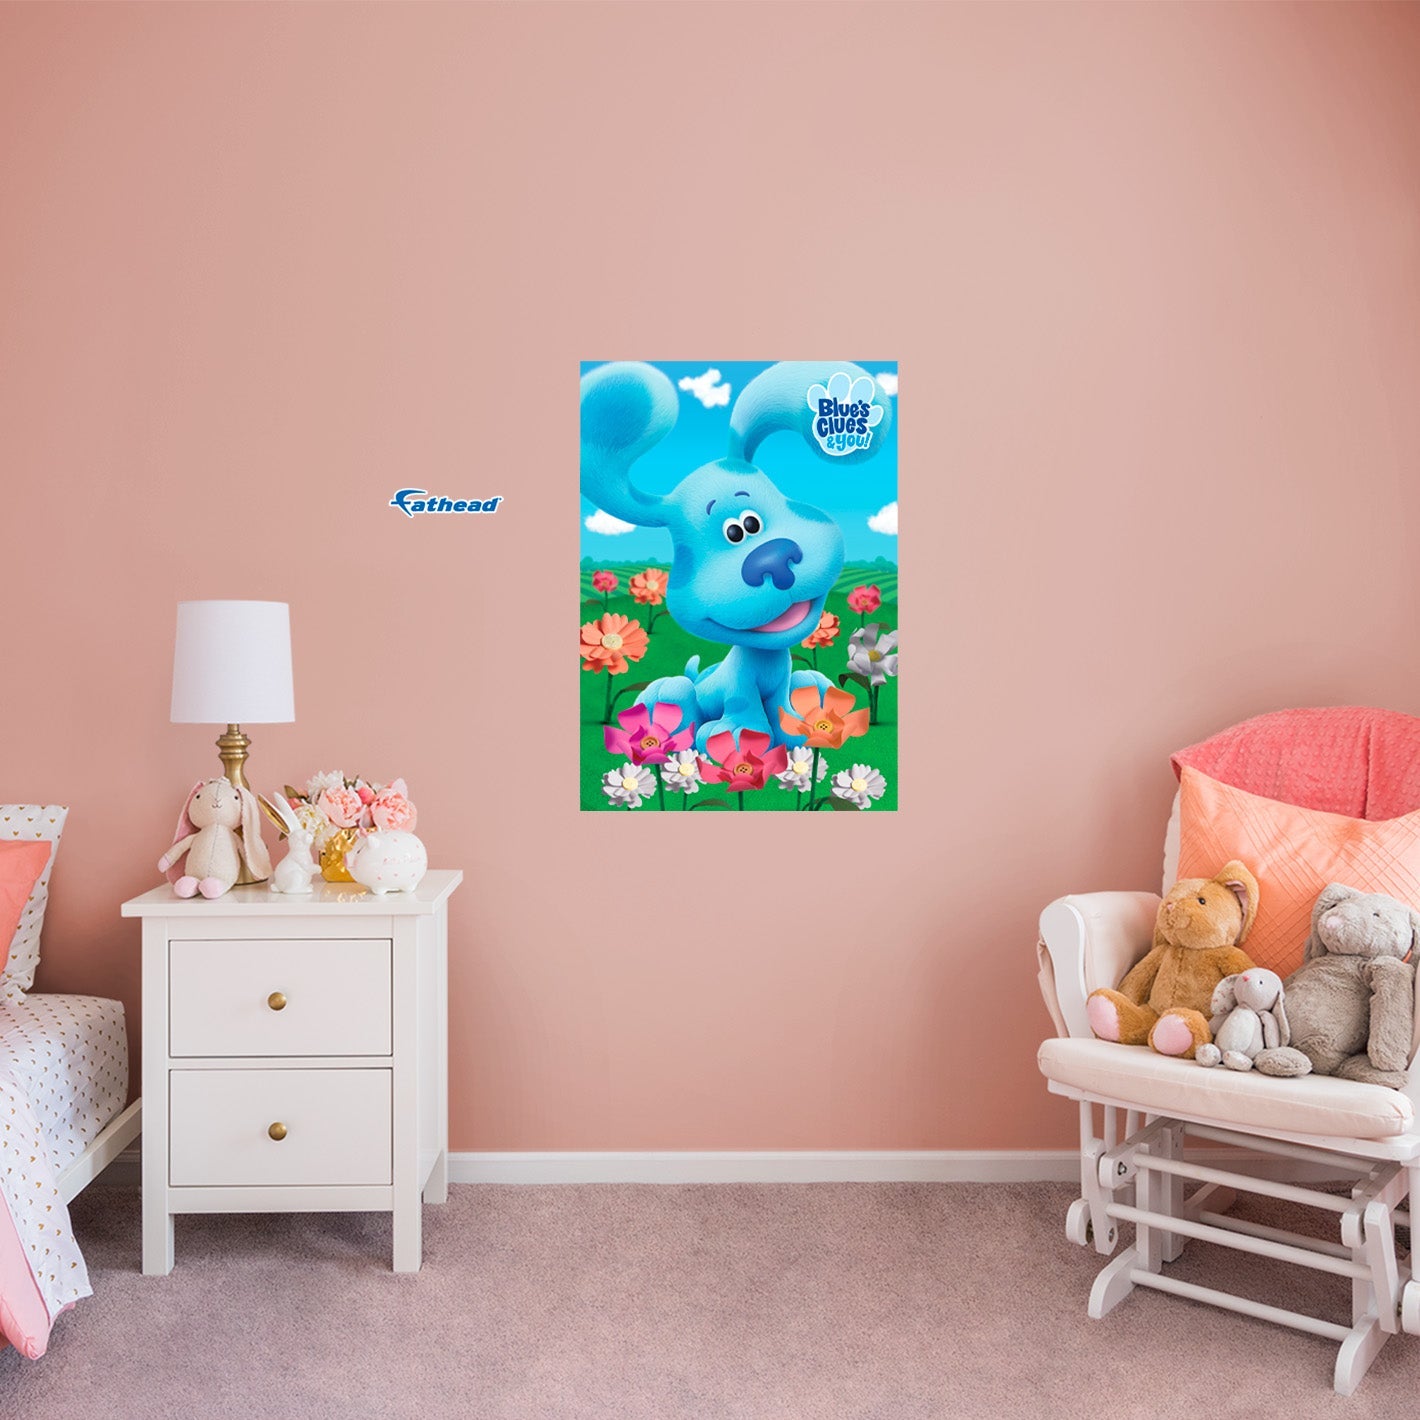 Blue's Clues: Field of Flowers Poster - Officially Licensed Nickelodeon Removable Adhesive Decal